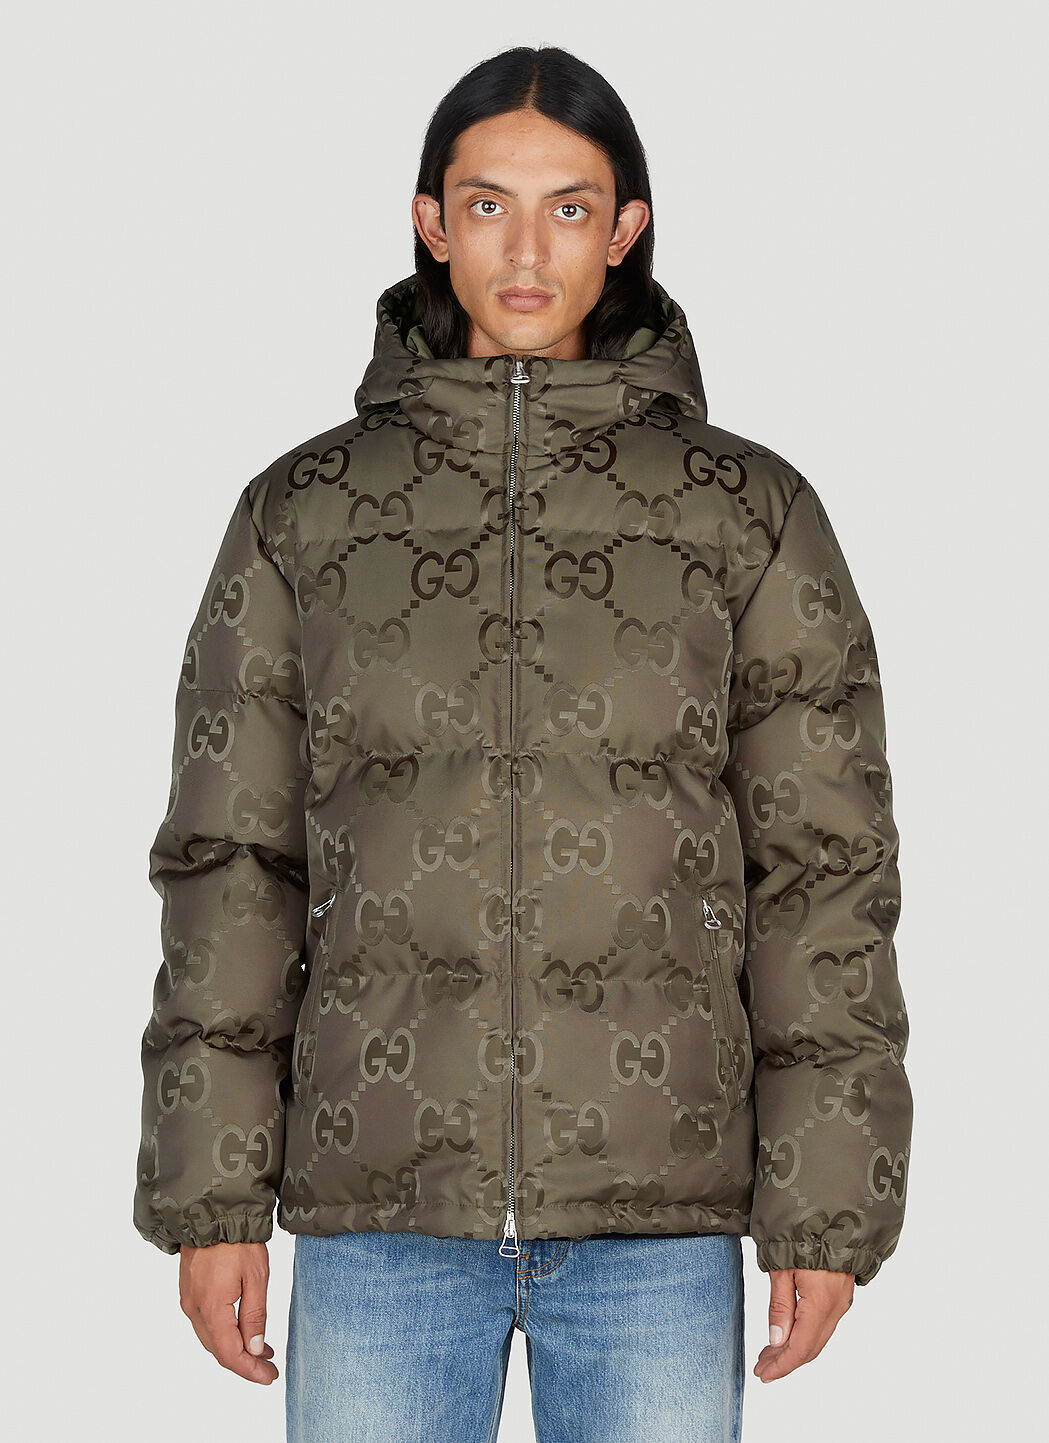 Gucci X North Face Gucci Puffer Jacket In All Sizes | eBay